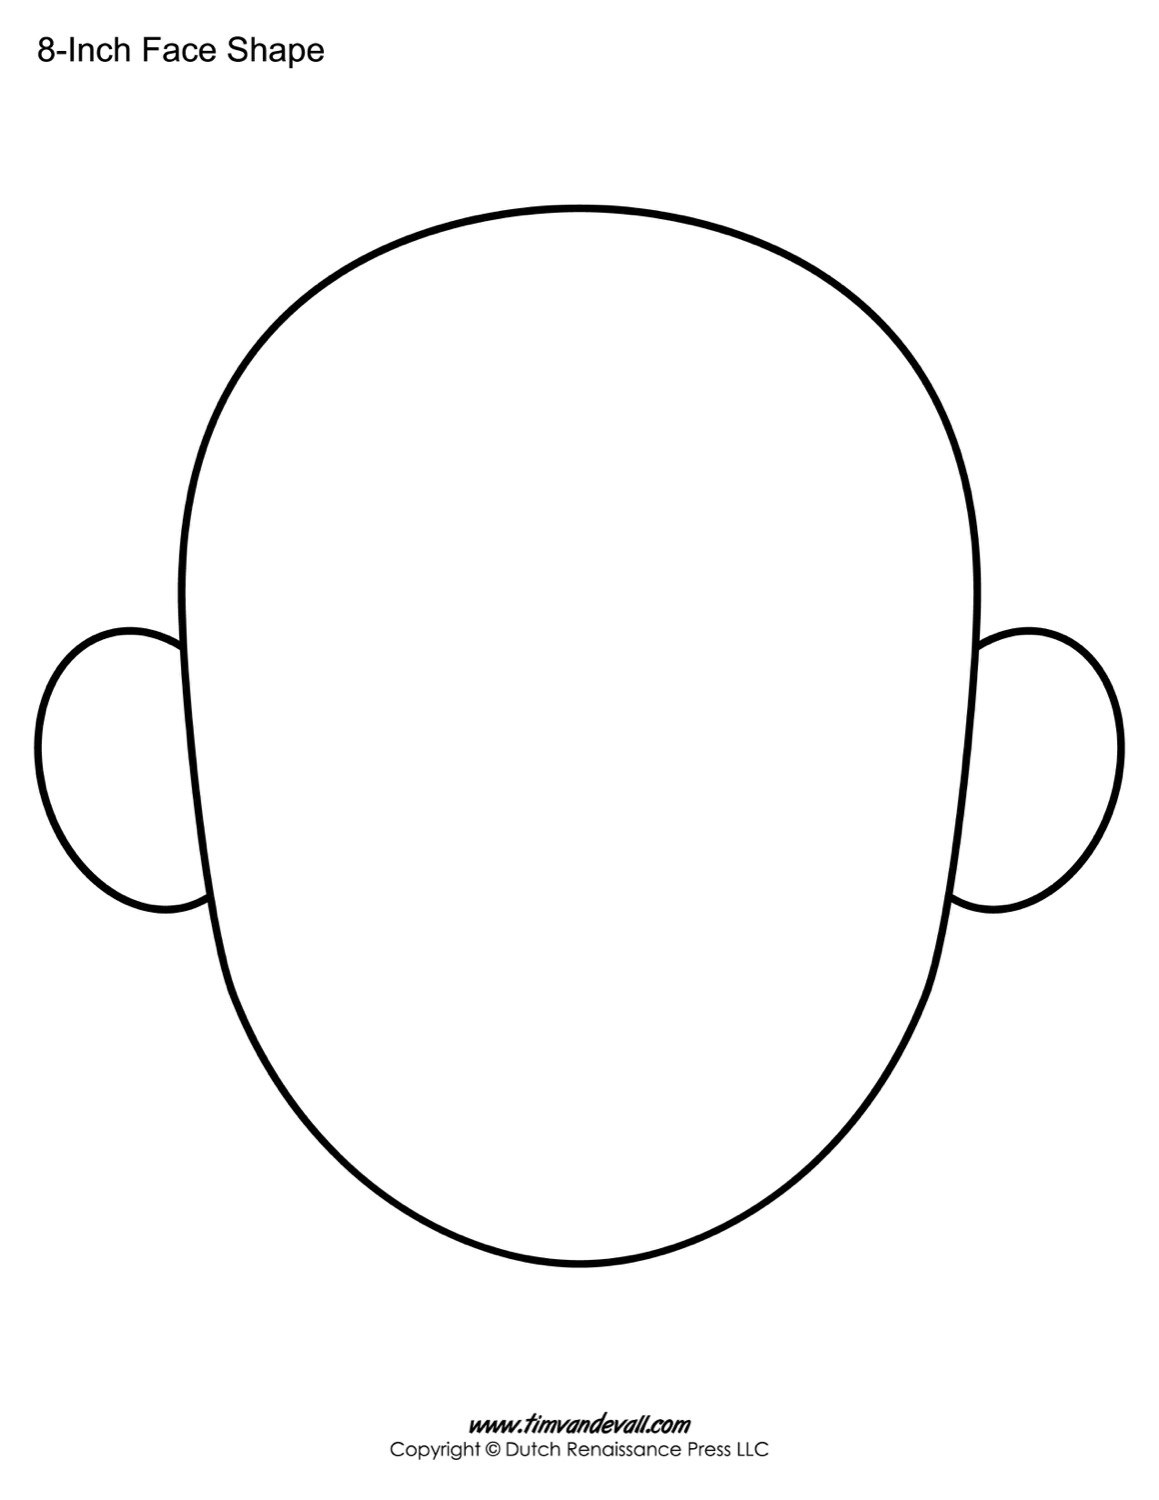 Blank Face Templates  Printable Face Shapes For Kids within Blank Face Template Preschool